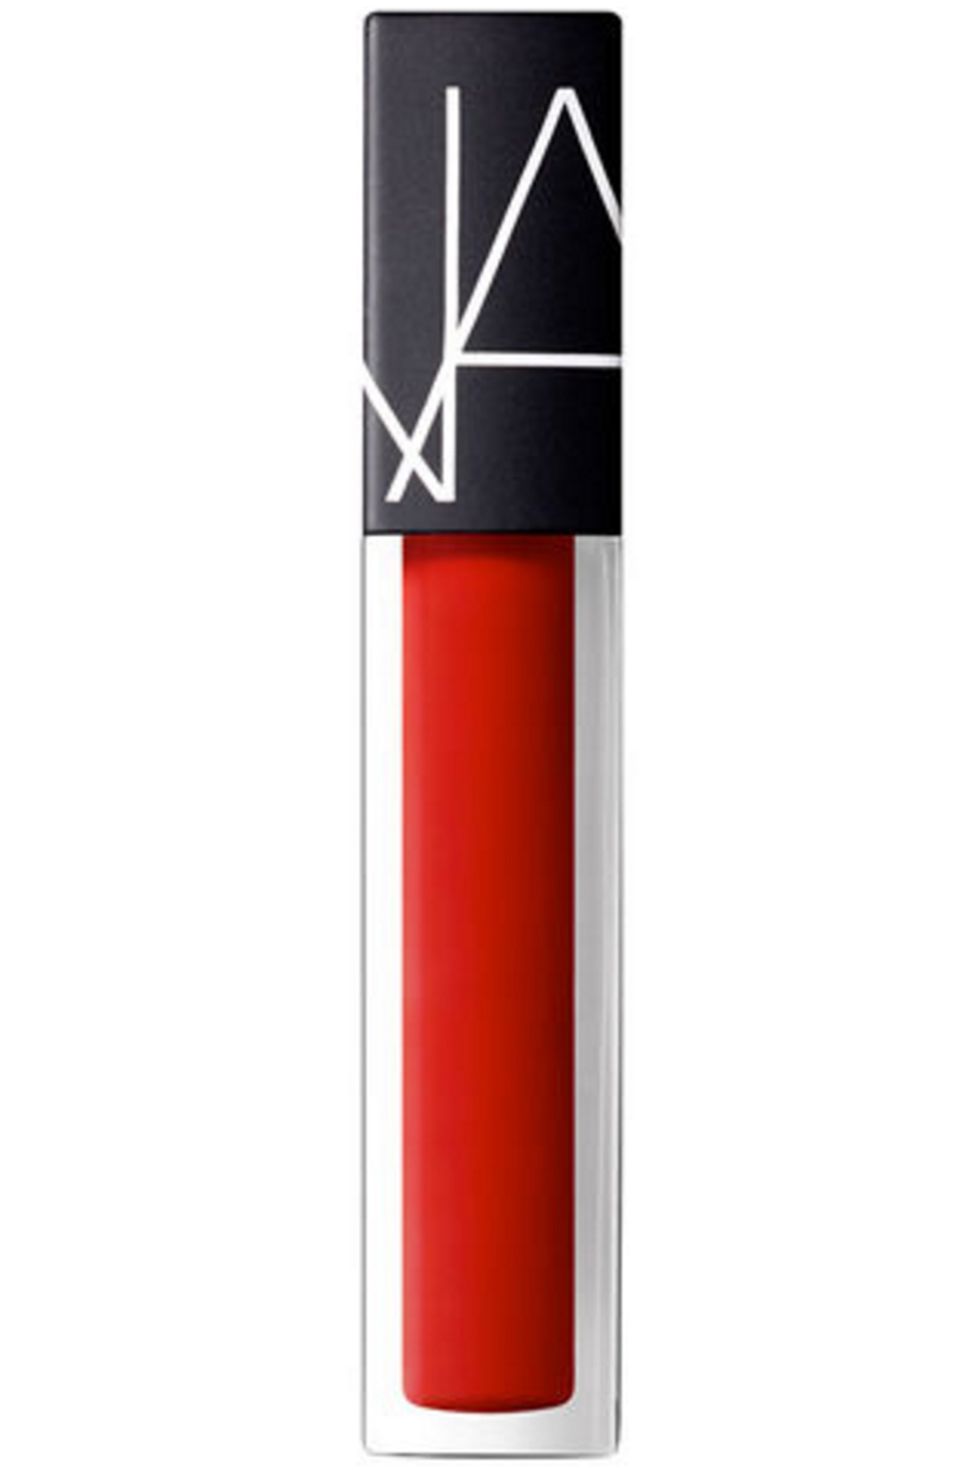 <p>You don't have to layer lipstick and gloss to get the effect. A hybrid formula like the new Nars Velvet Lip Glides gives both rich color payoff and glossy shine.&nbsp;</p><p><em data-redactor-tag="em" data-verified="redactor">Nars Velvet Lip Glide in Mineshaft, $26. </em><a href="http://www.sephora.com/velvet-lip-glide-P412131?skuId=1870047"><em data-redactor-tag="em" data-verified="redactor">sephora.com</em></a></p>